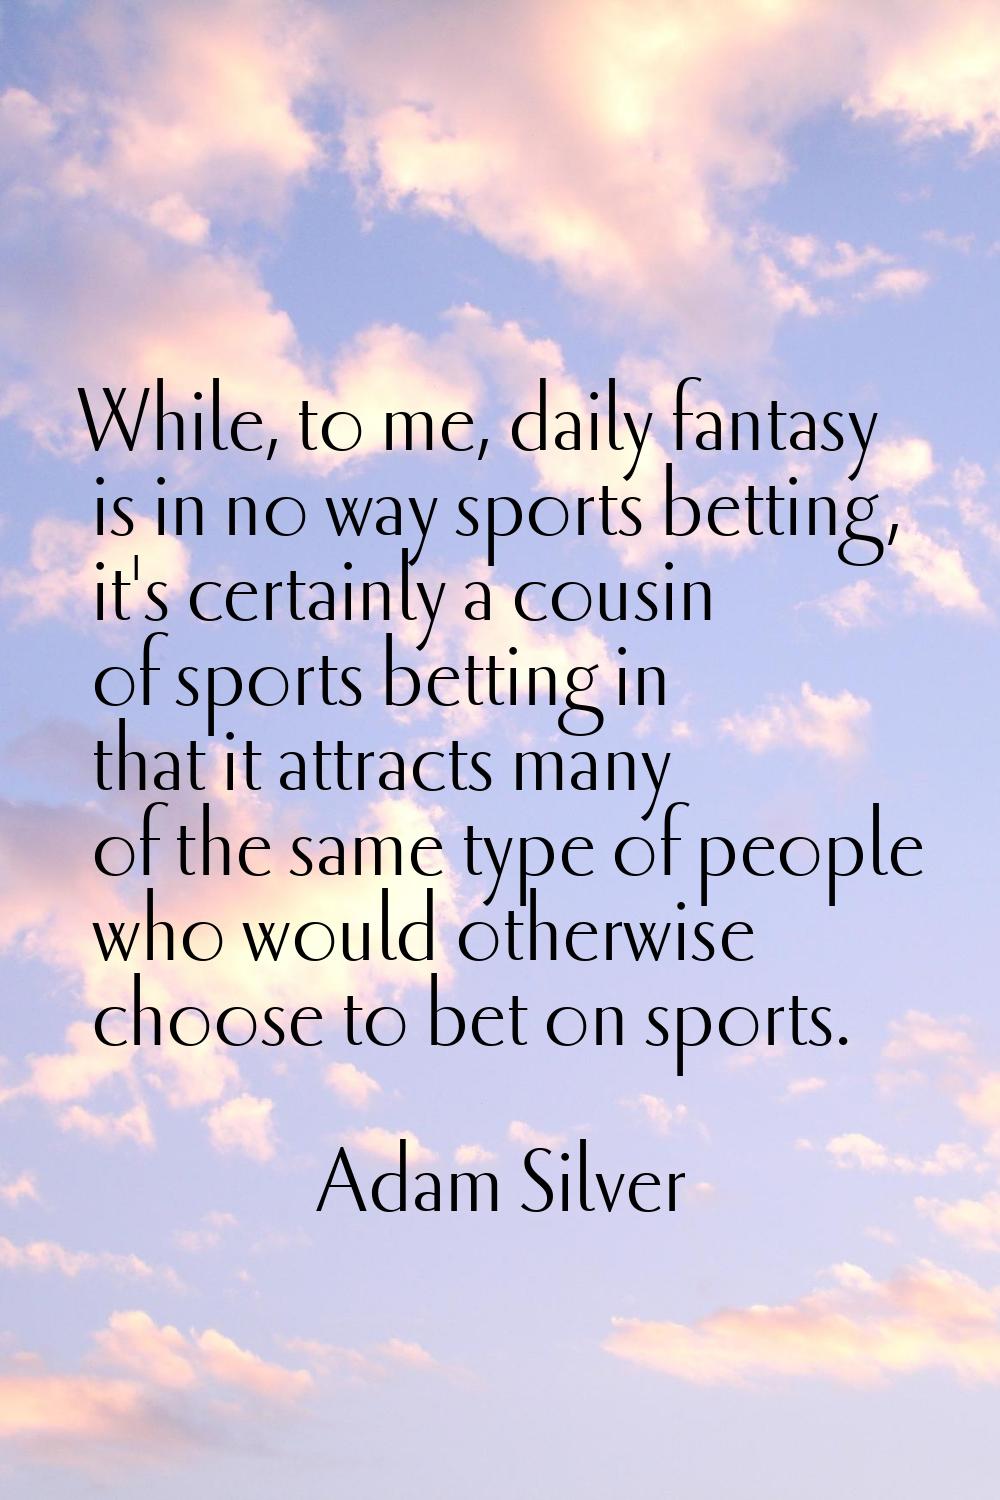 While, to me, daily fantasy is in no way sports betting, it's certainly a cousin of sports betting 